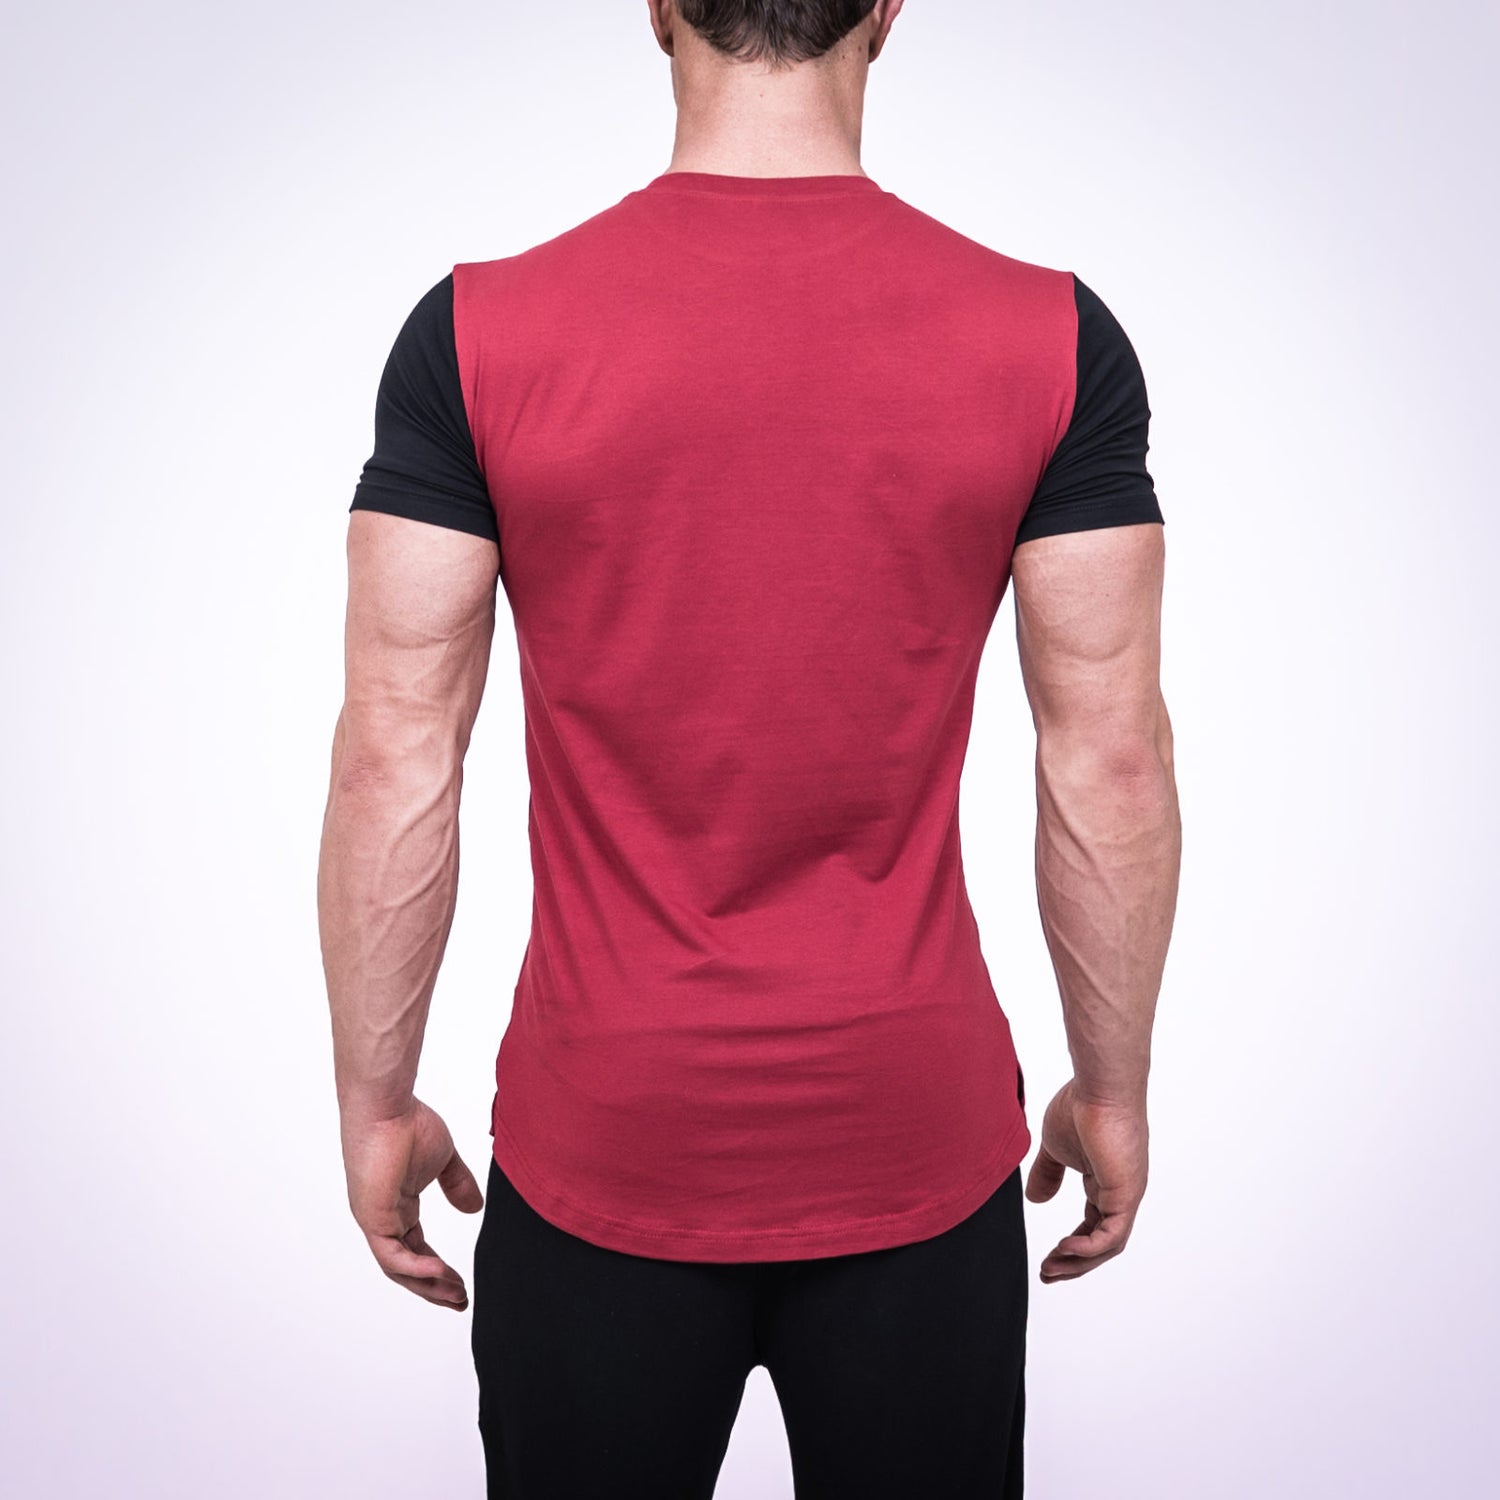 Urban fit tee red